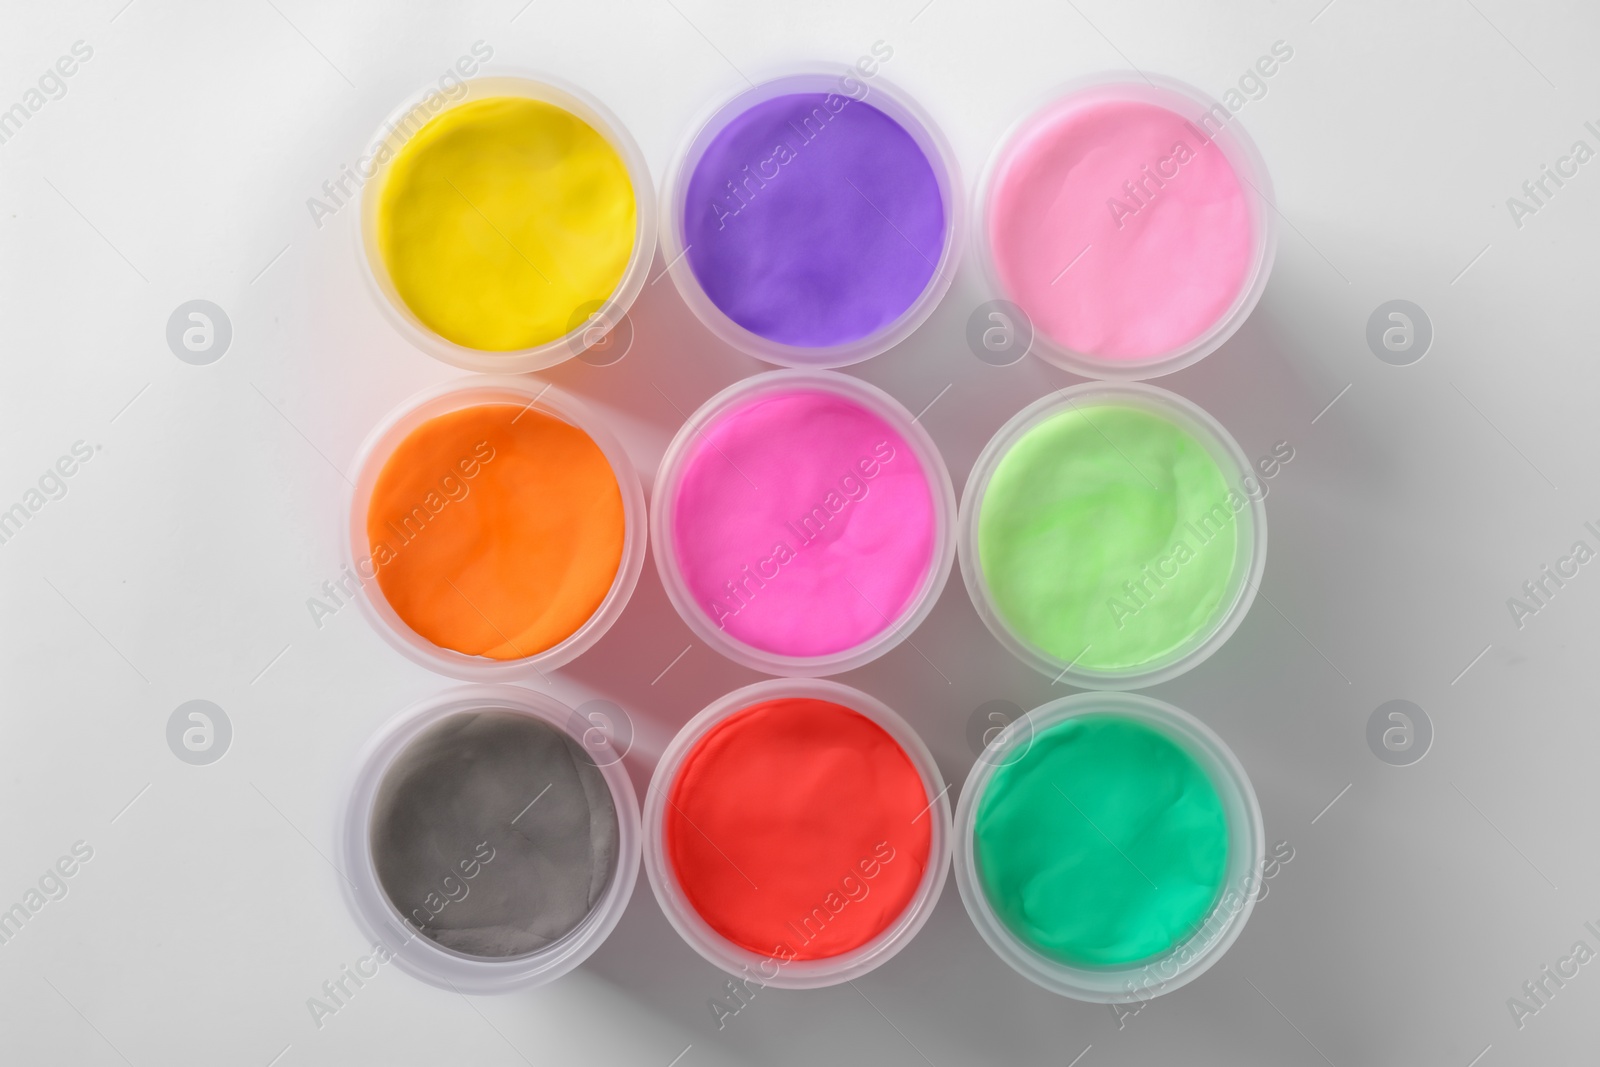 Photo of Plastic containers with different color play dough on white background, top view